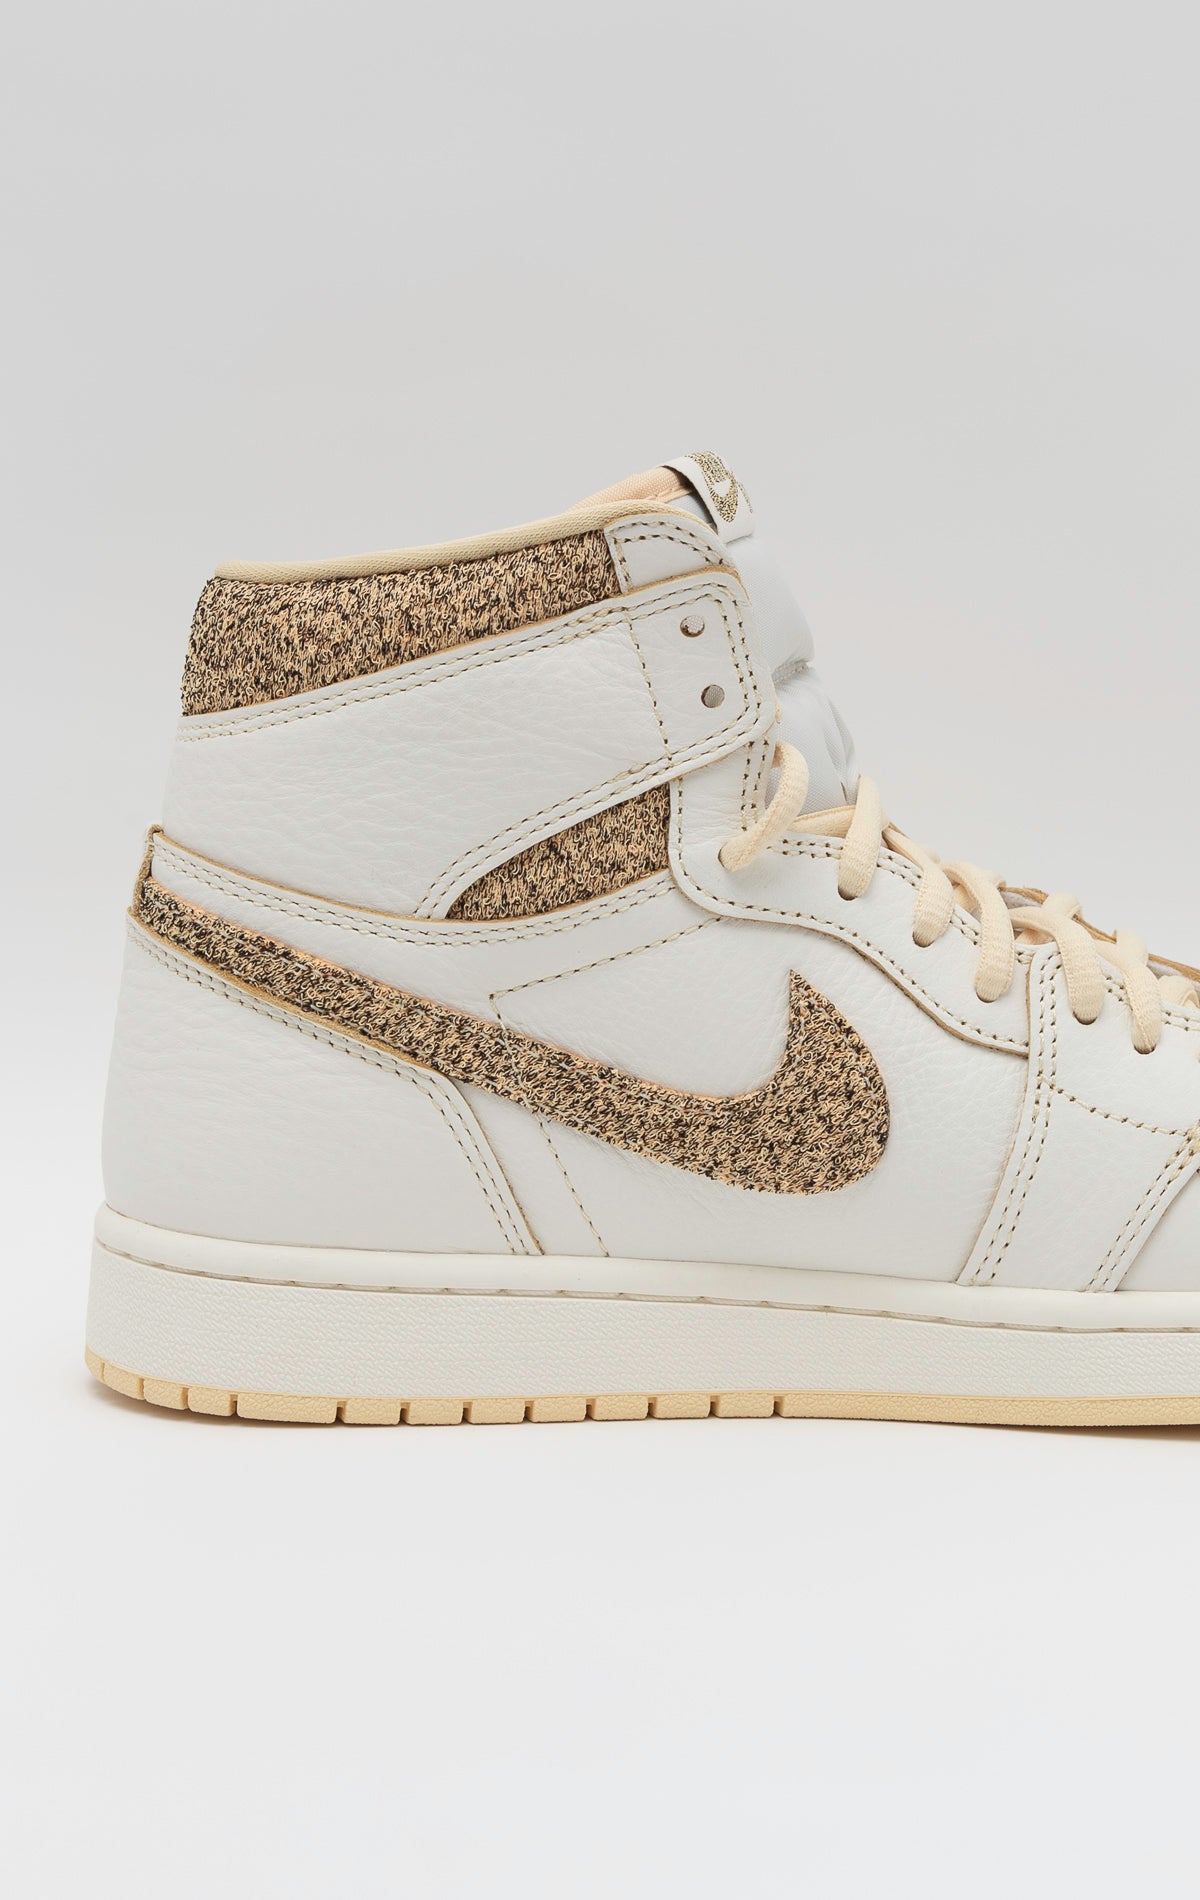 Air Jordan 1 Retro High OG Craft sneakers in Sail and Pale Vanilla premium leather with contrasting black accents and an understated pale vanilla outsole. The classic Nike Air logo adorns the tongue